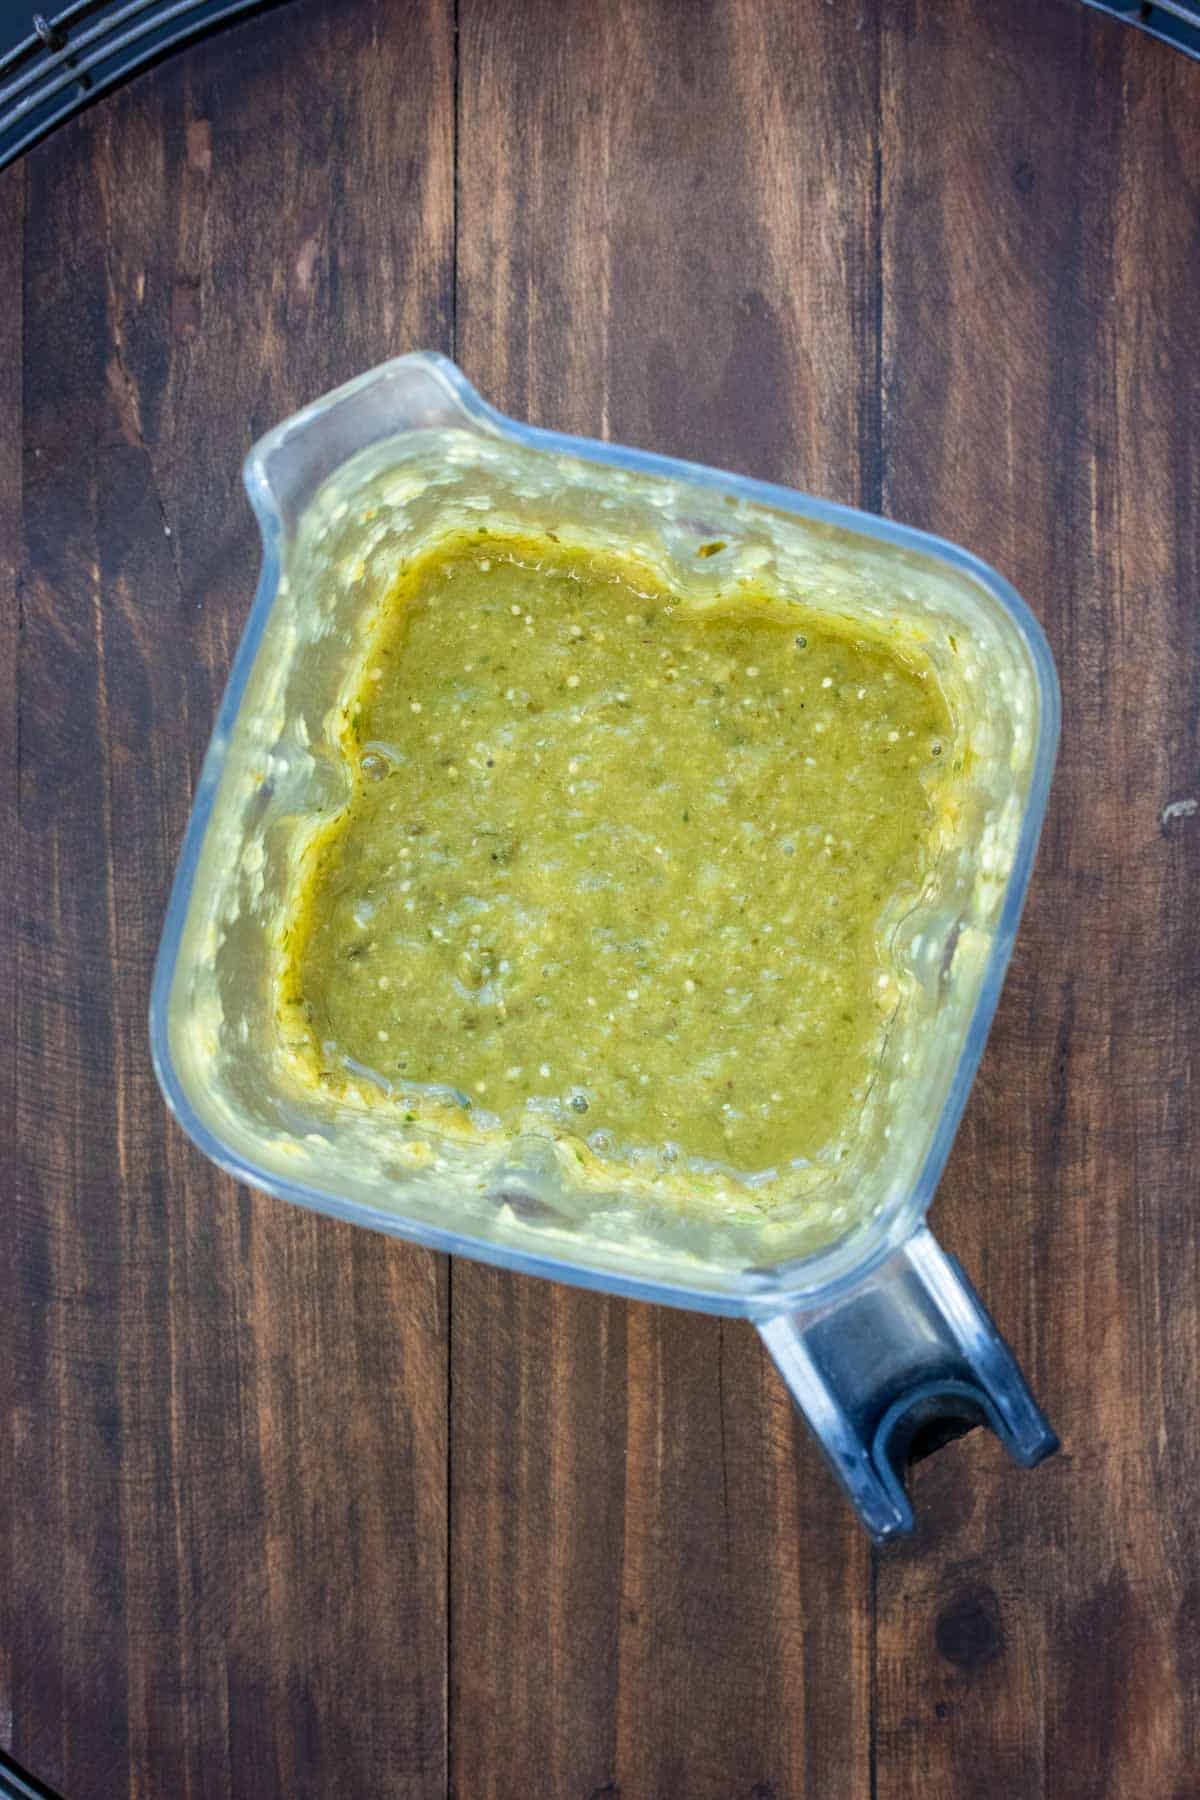 Top view of a blender with green sauce in it